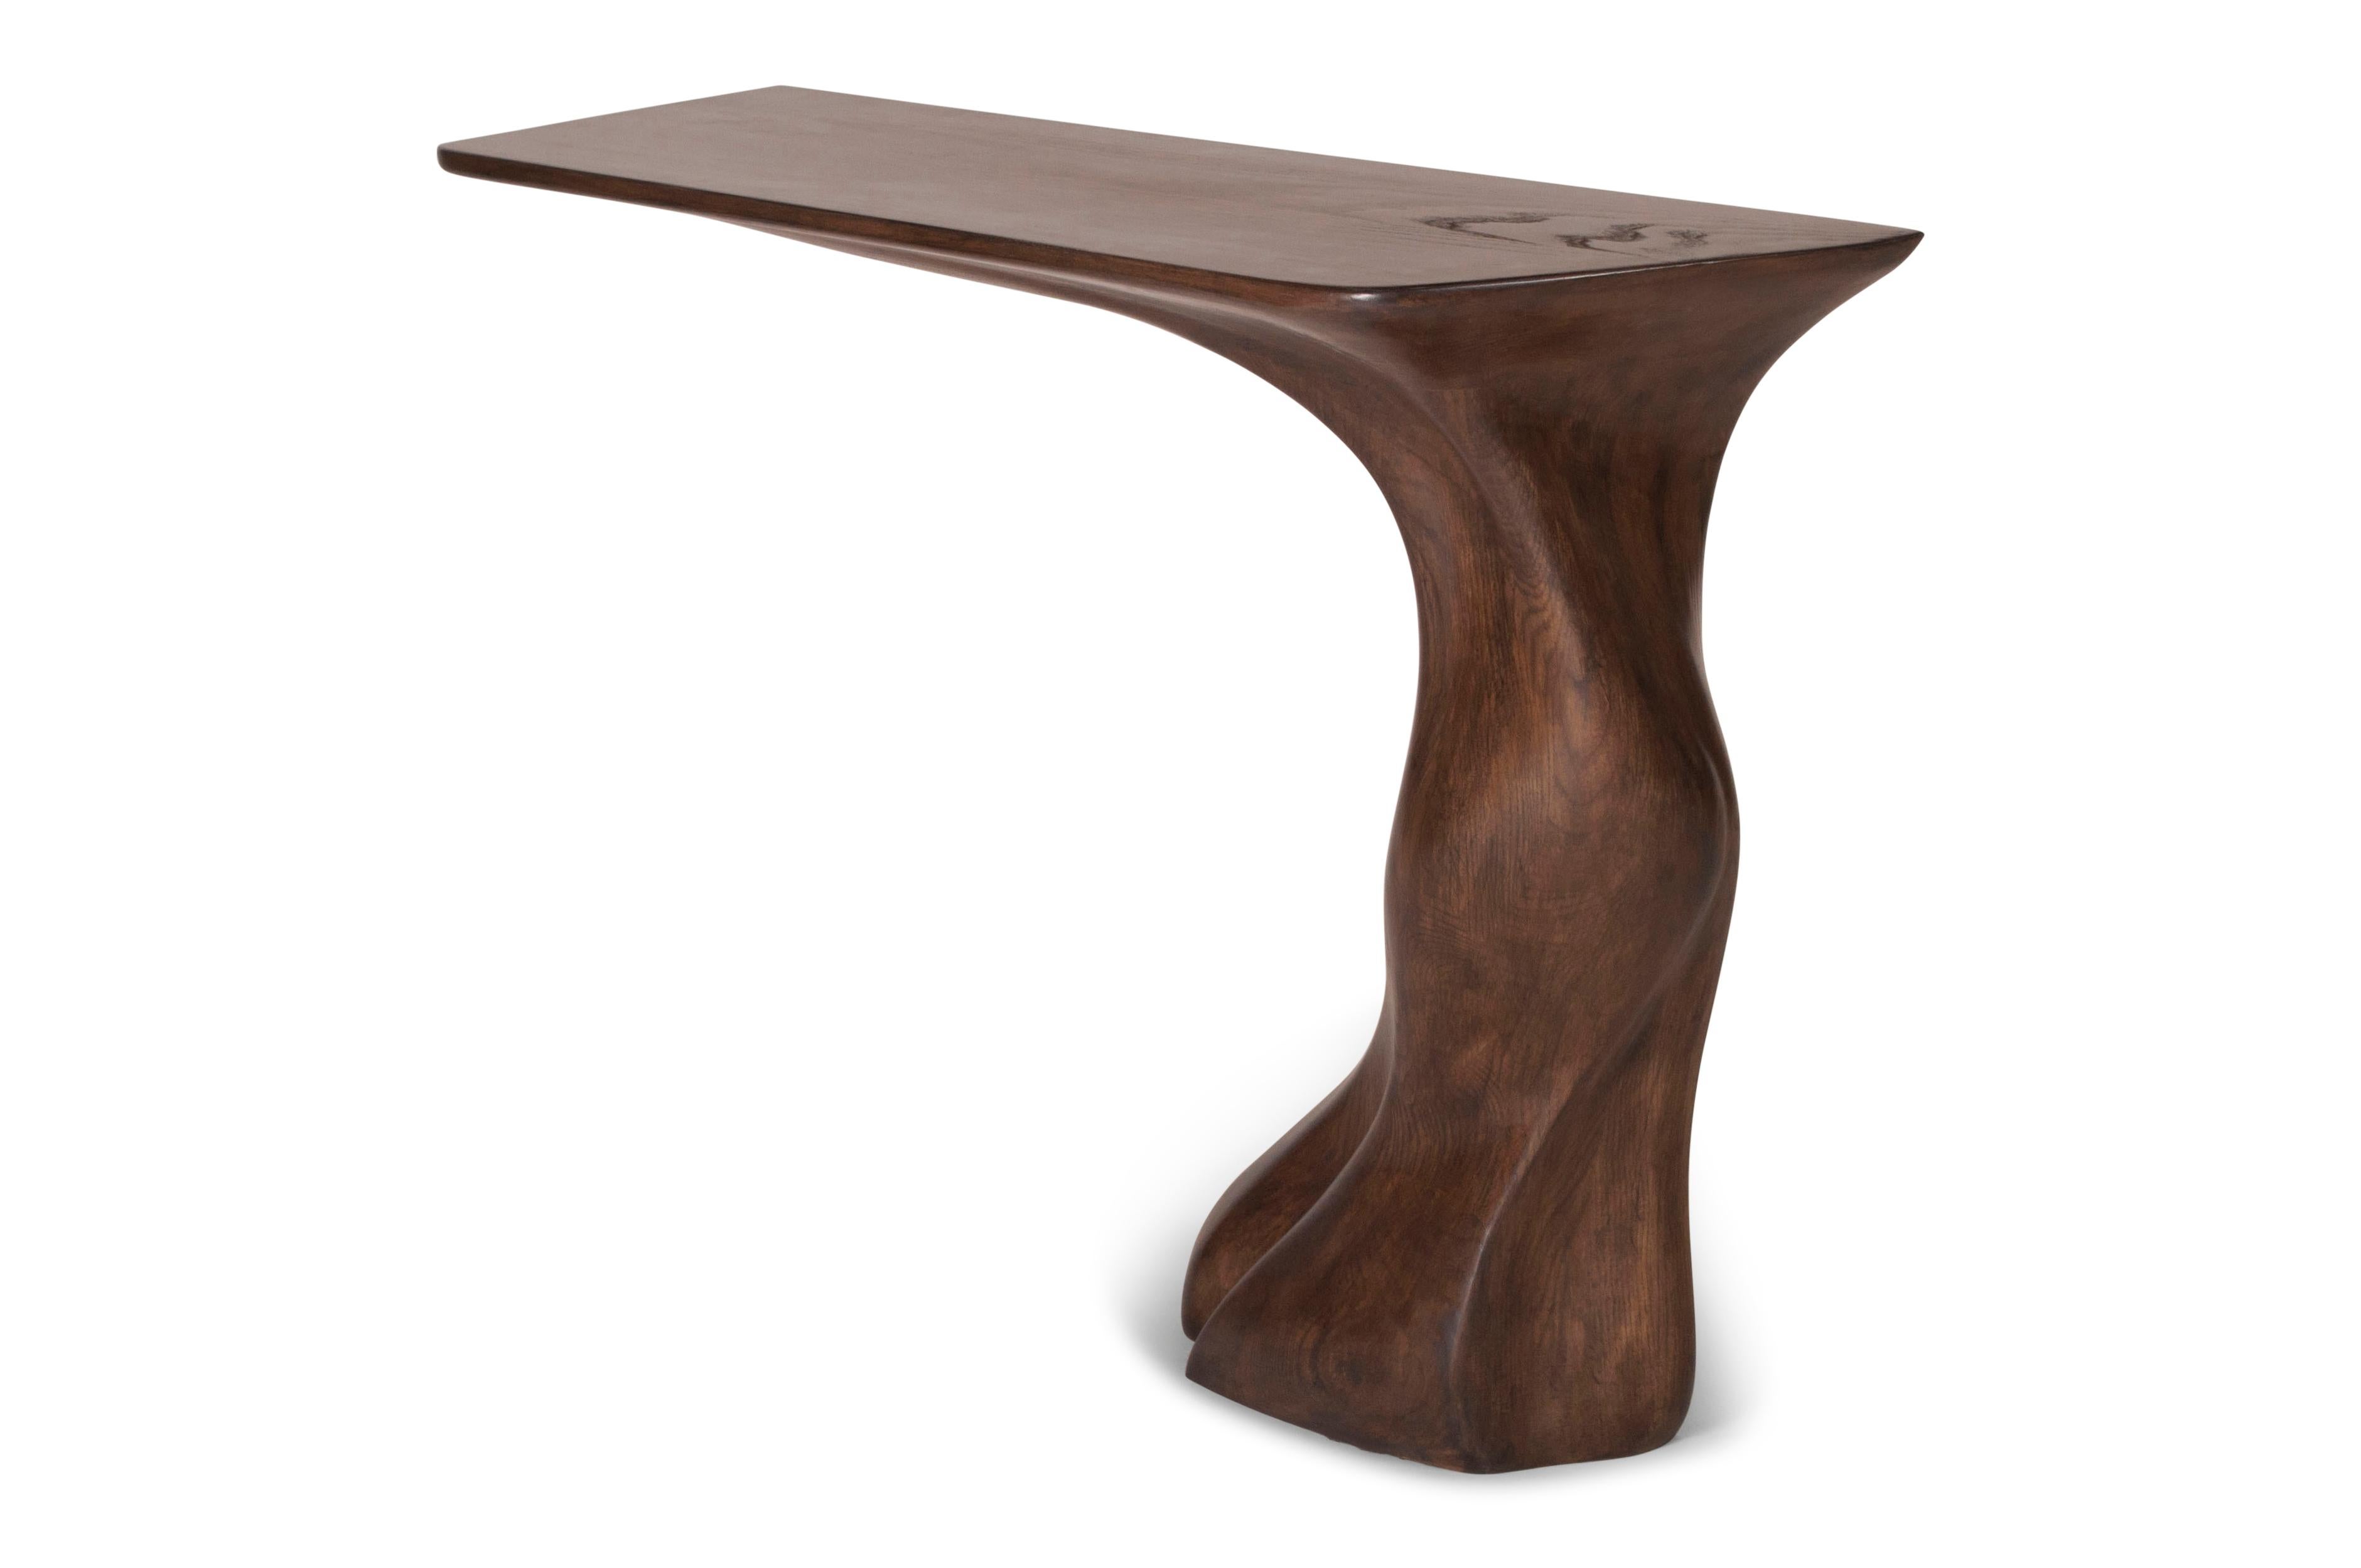 American Amorph Frolic Wall Mounted console table in Graphite Walnut stain on Ash wood For Sale